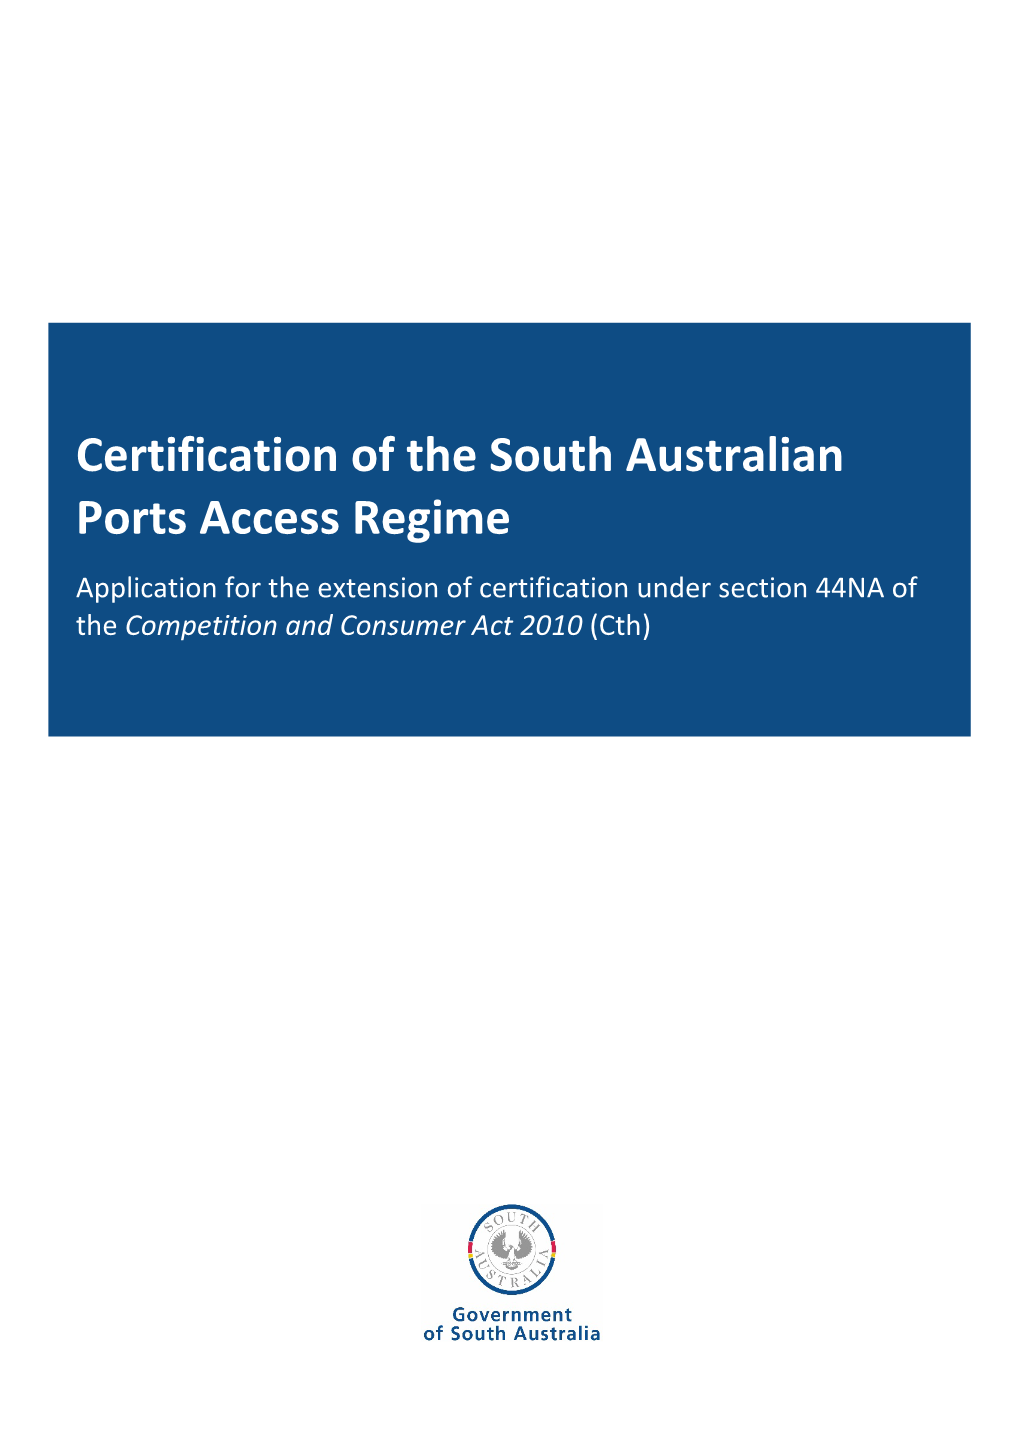 Application for Certification of the South Australian Ports Access